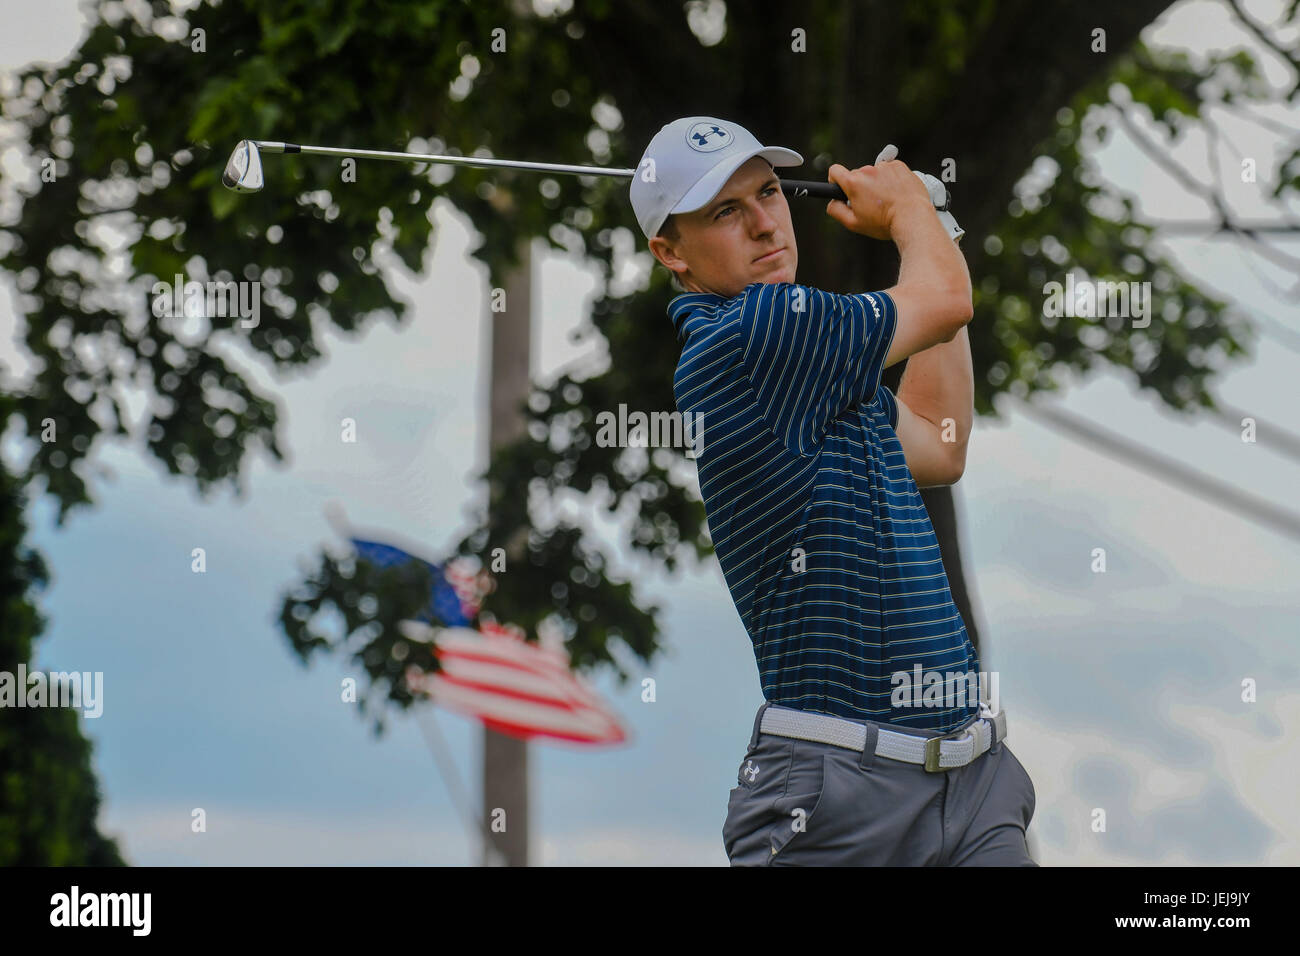 Sunday June 25, 2017: Jordan Spieth tees off from the 9th hole during the final round of the Travelers Golf Championship at TPC River Highlands in Cromwell, Connecticut. Gregory Vasil/CSM Stock Photo